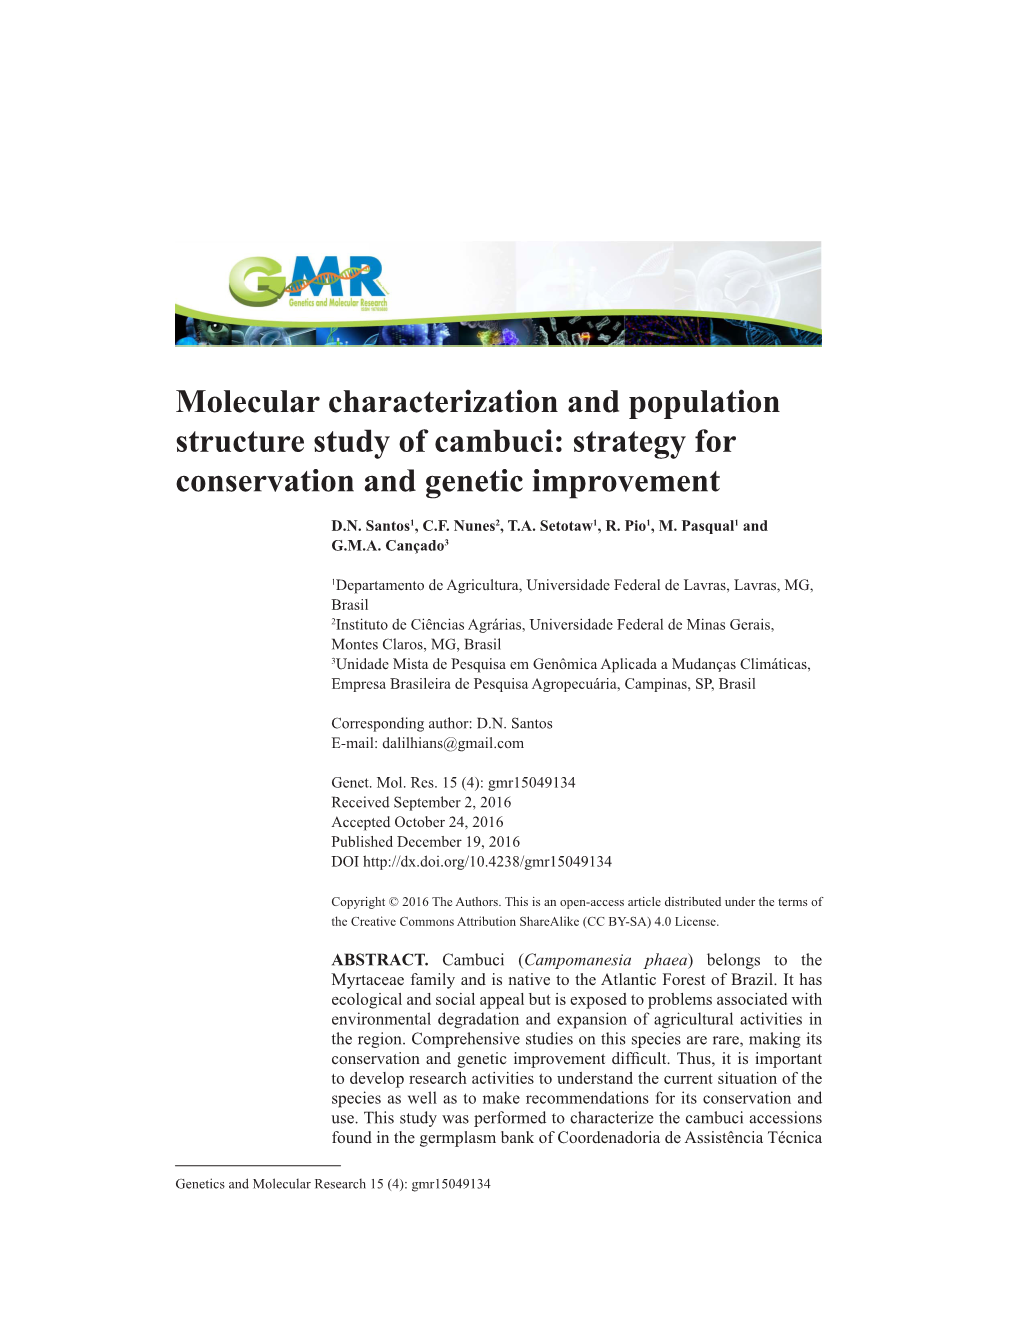 Molecular Characterization and Population Structure Study of Cambuci: Strategy for Conservation and Genetic Improvement